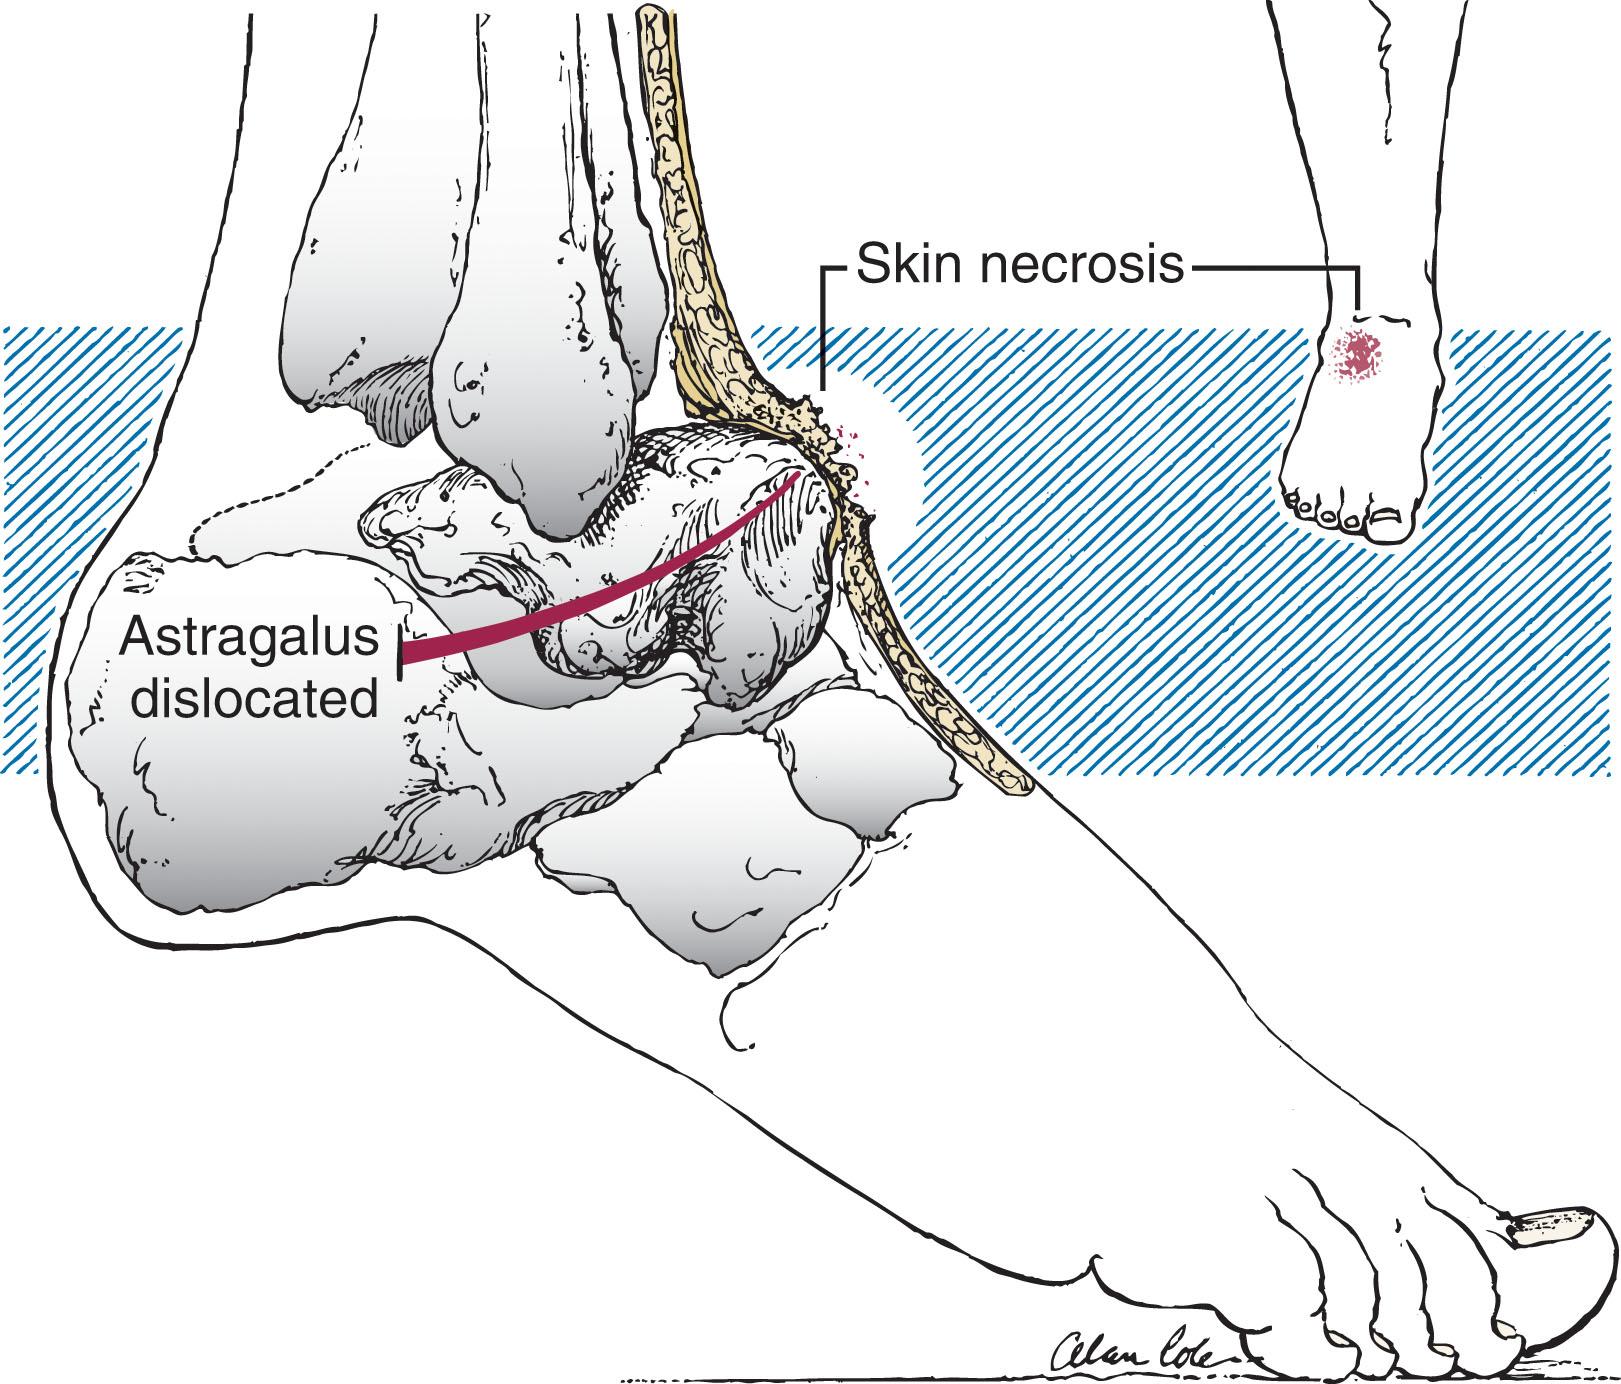 Fig. 46-8, Displacement of the talus against the skin causes pressure necrosis, which can lead to development of an open fracture. These bony protrusions must be evaluated and treated immediately.